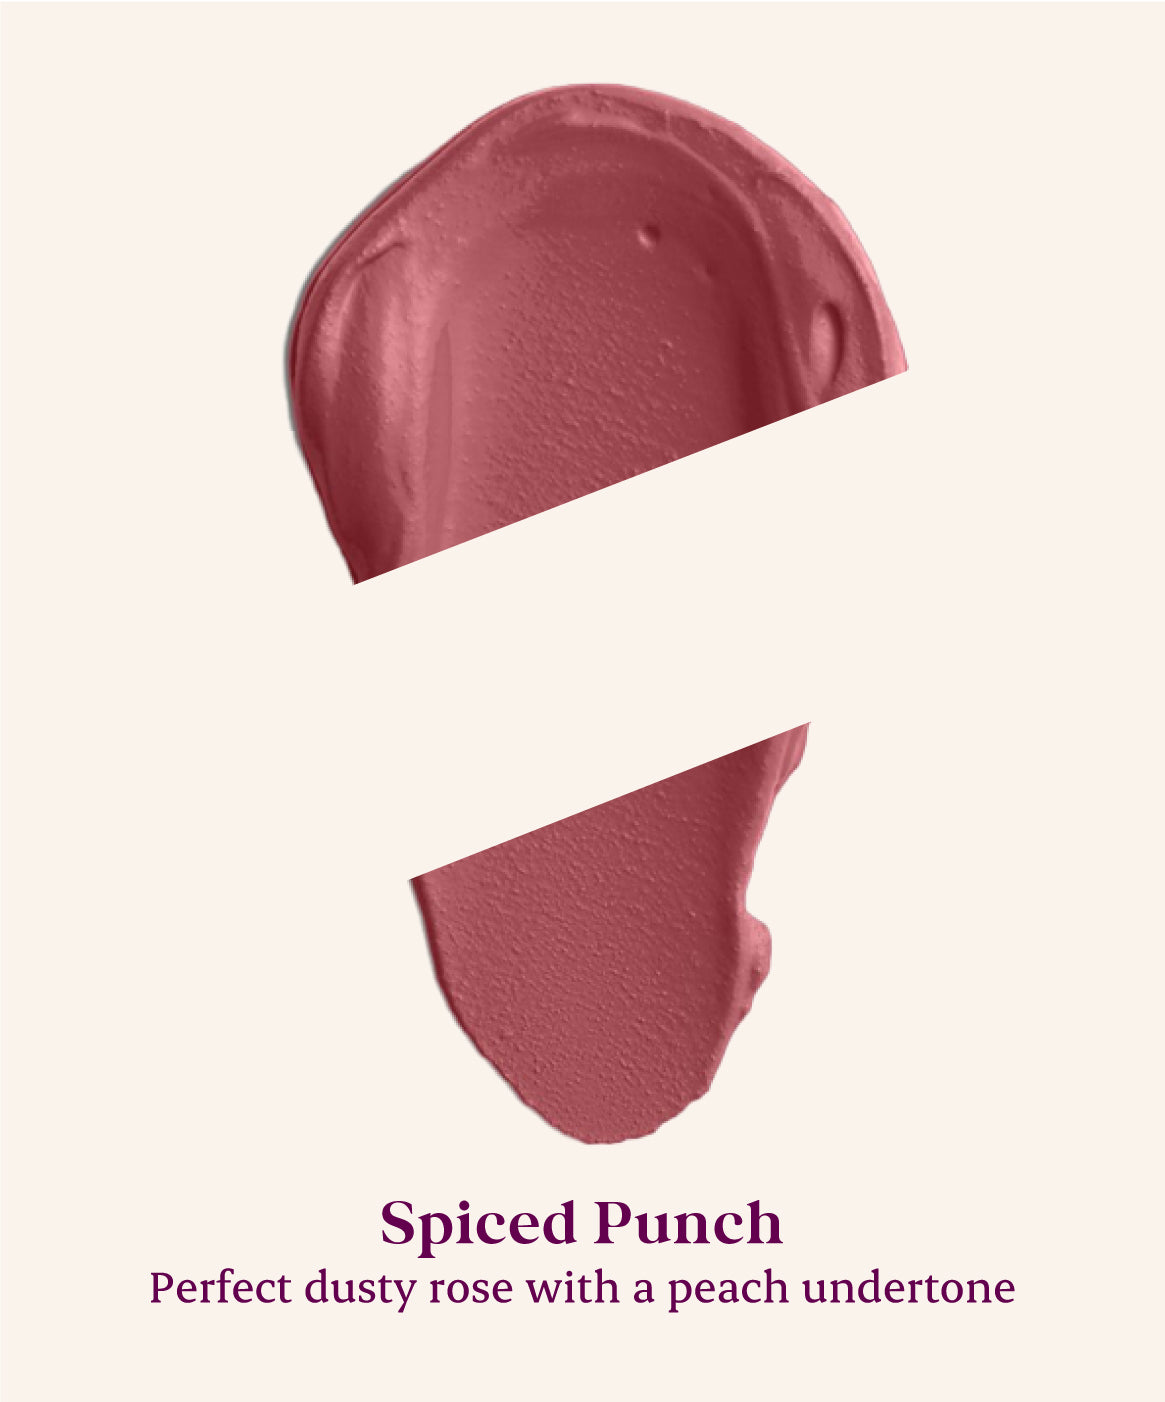 Spiced Punch 04 - Dusty rose